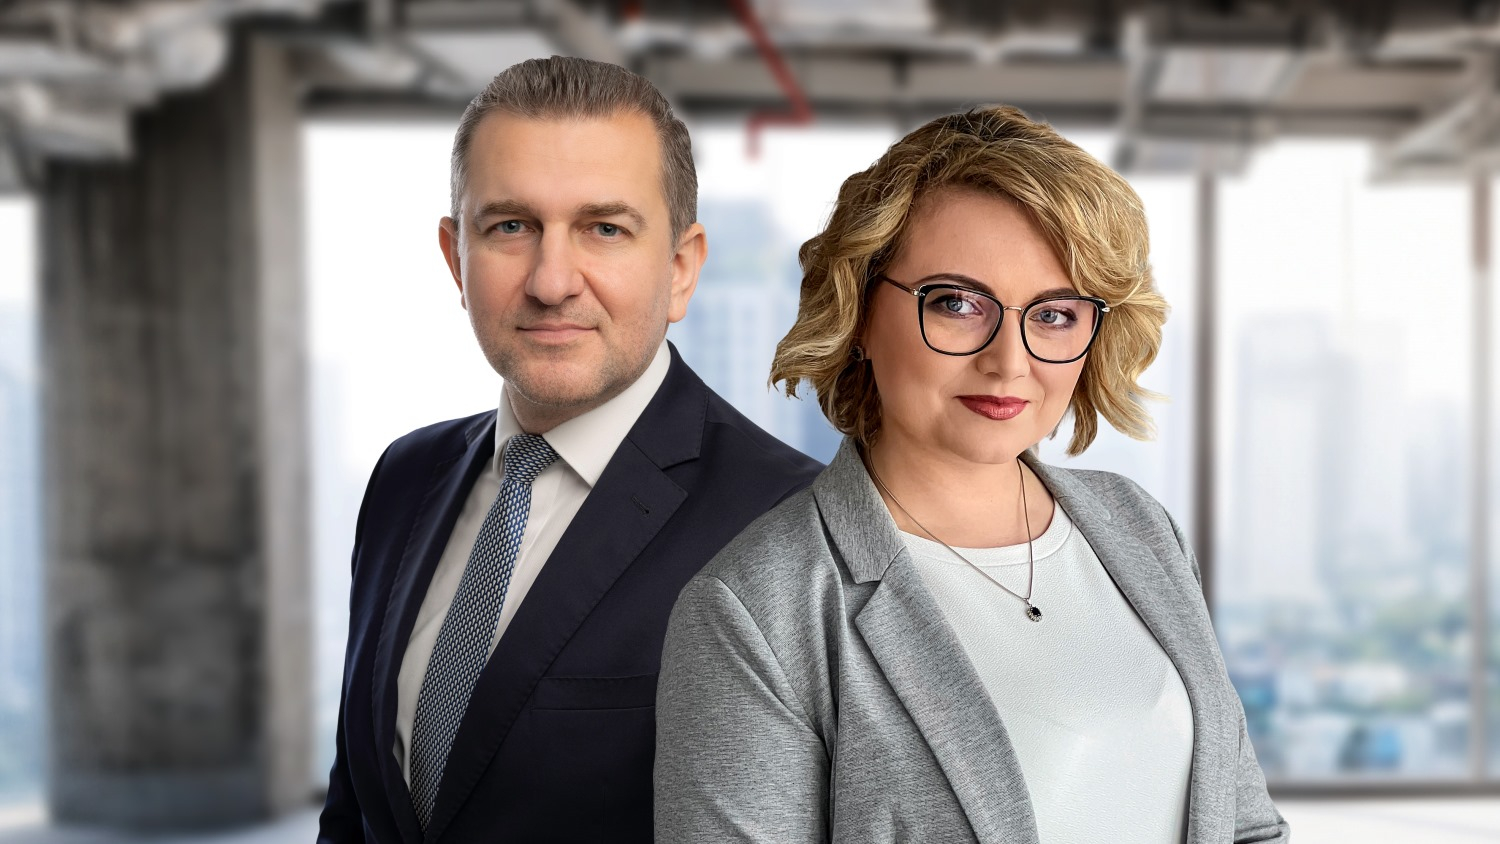 News Article Avison Young investment Poland report